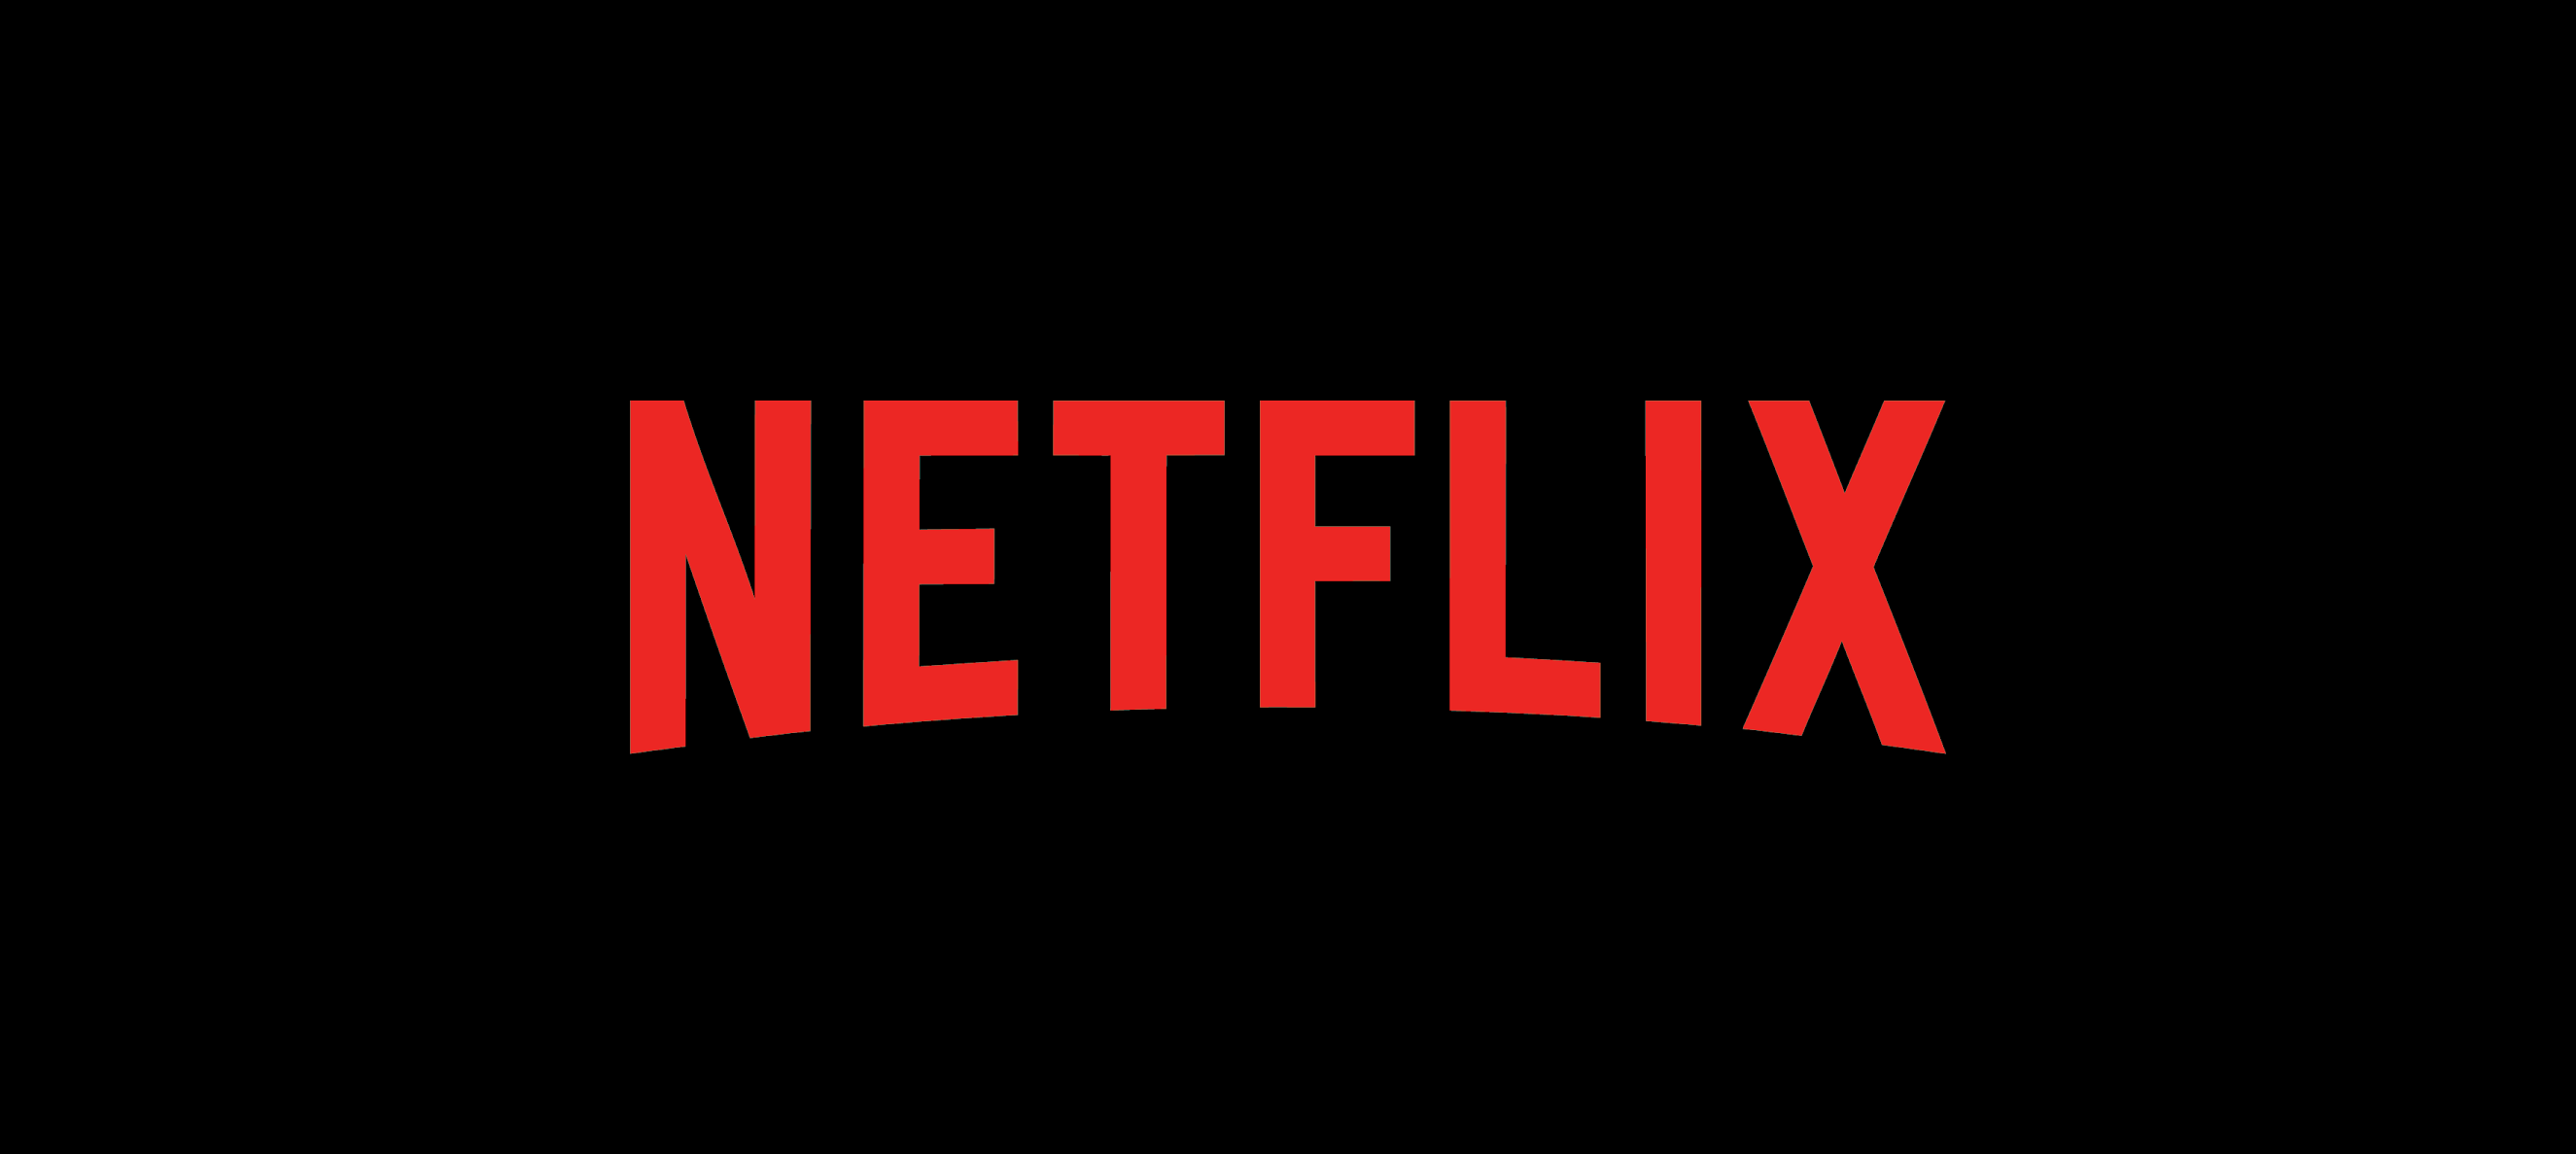 Here's Our Top Recommendations on the Netflix February 2021 Lineup